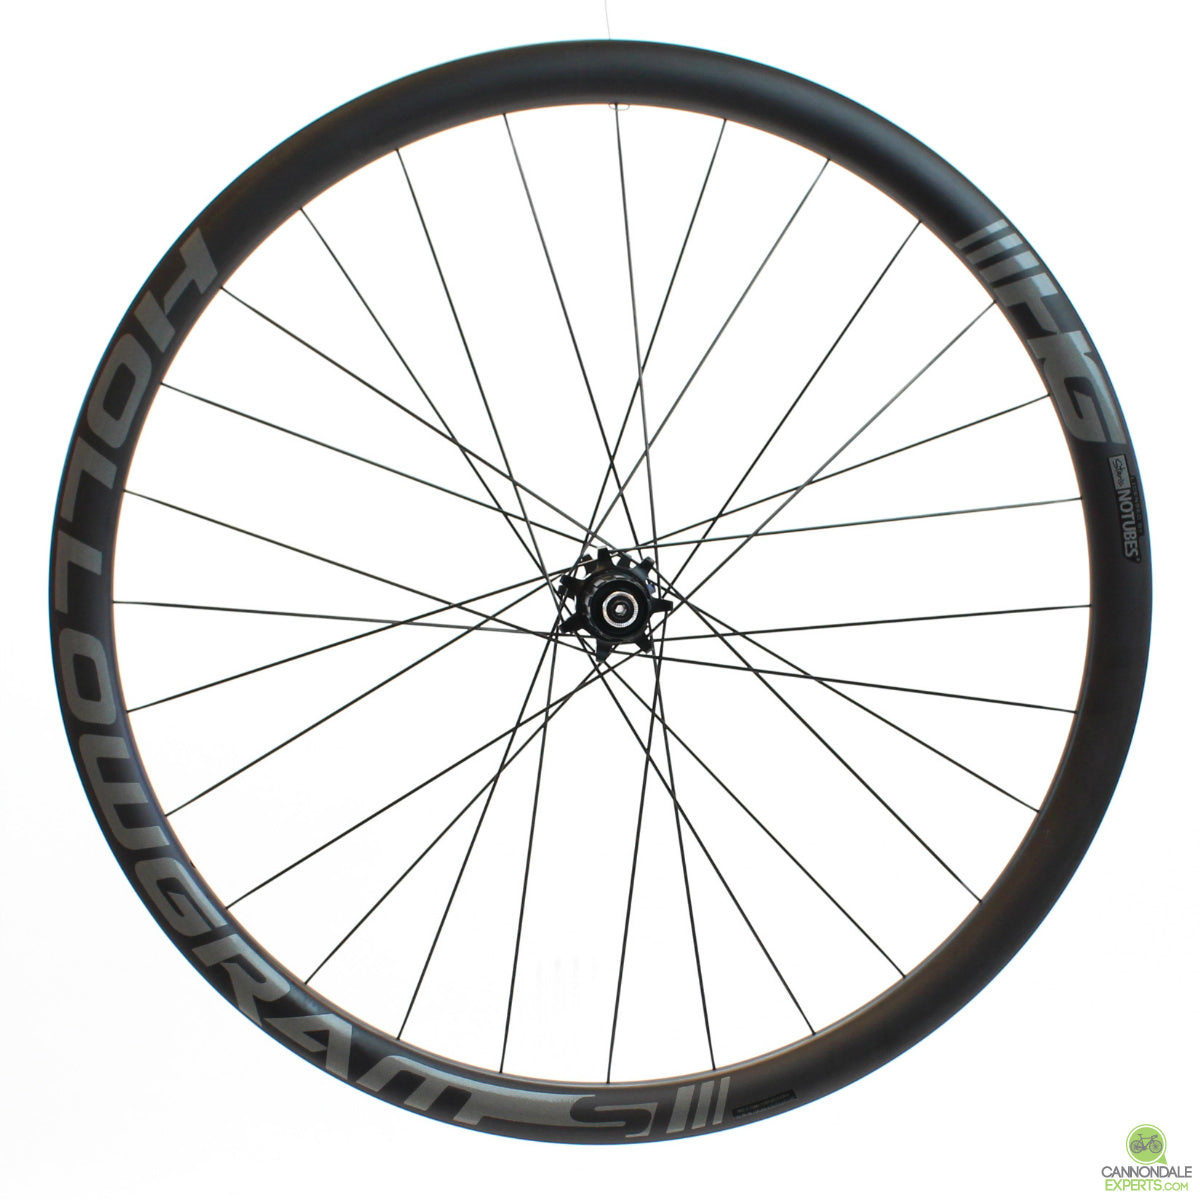 Cannondale Hollowgram Si 700c Rear Wheel | CannondaleExperts.com